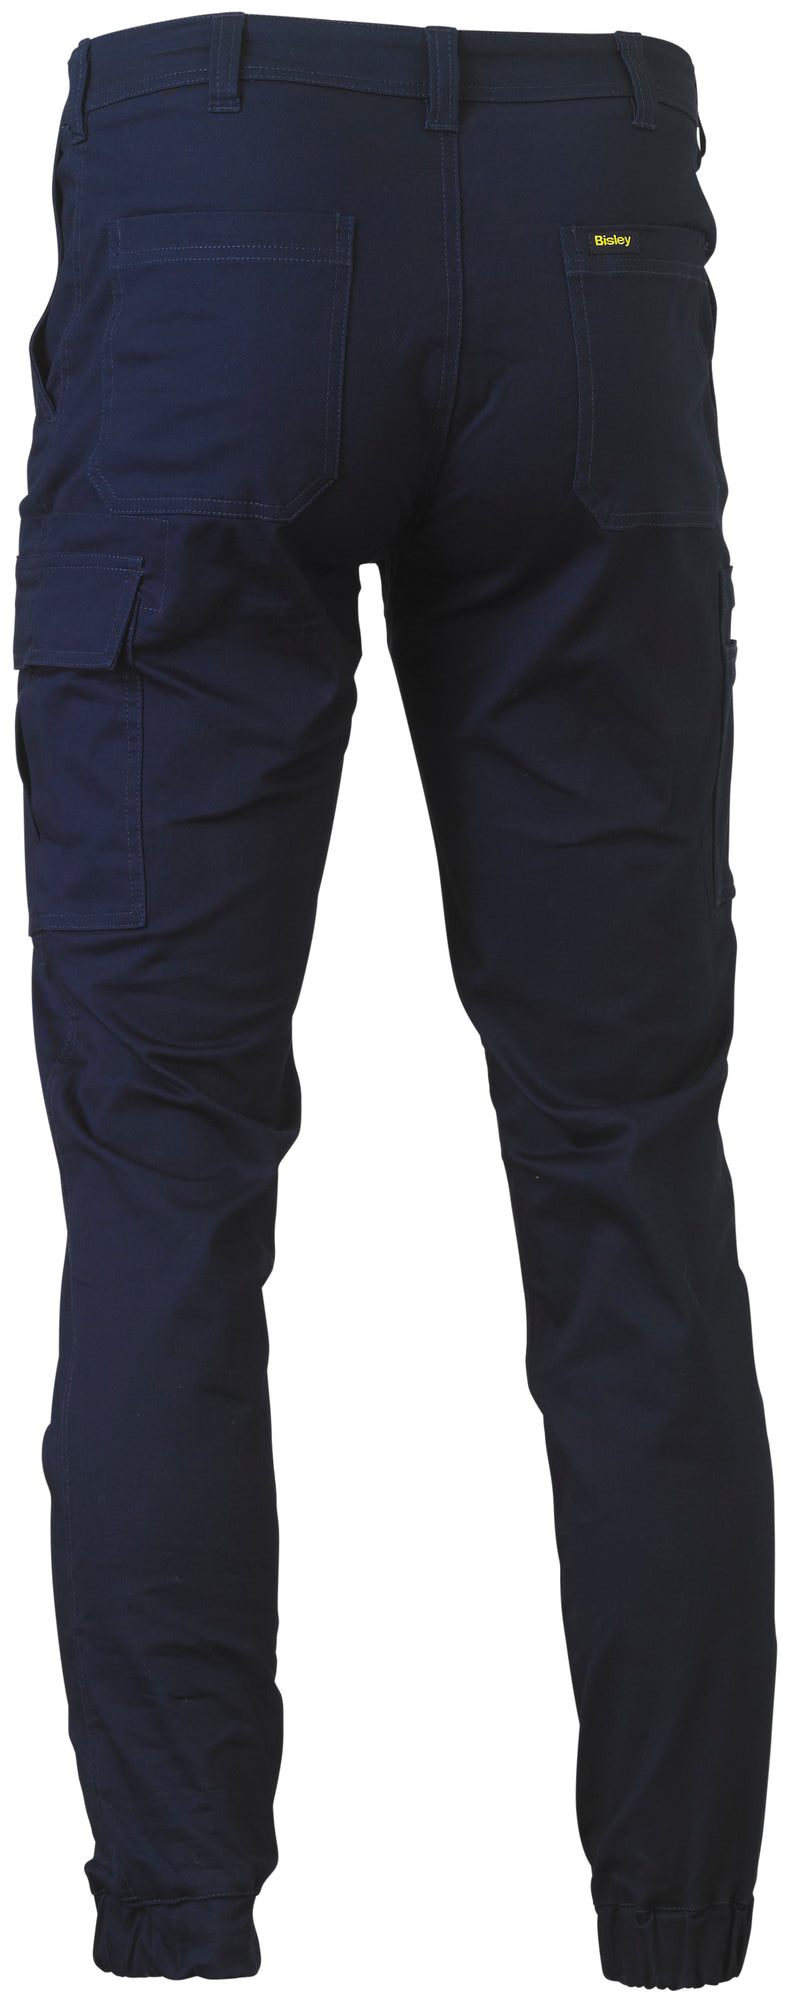 Load image into Gallery viewer, Wholesale BPC6028 Bisley Stretch Cotton Drill Cargo Cuffed Pants - Stout Printed or Blank
